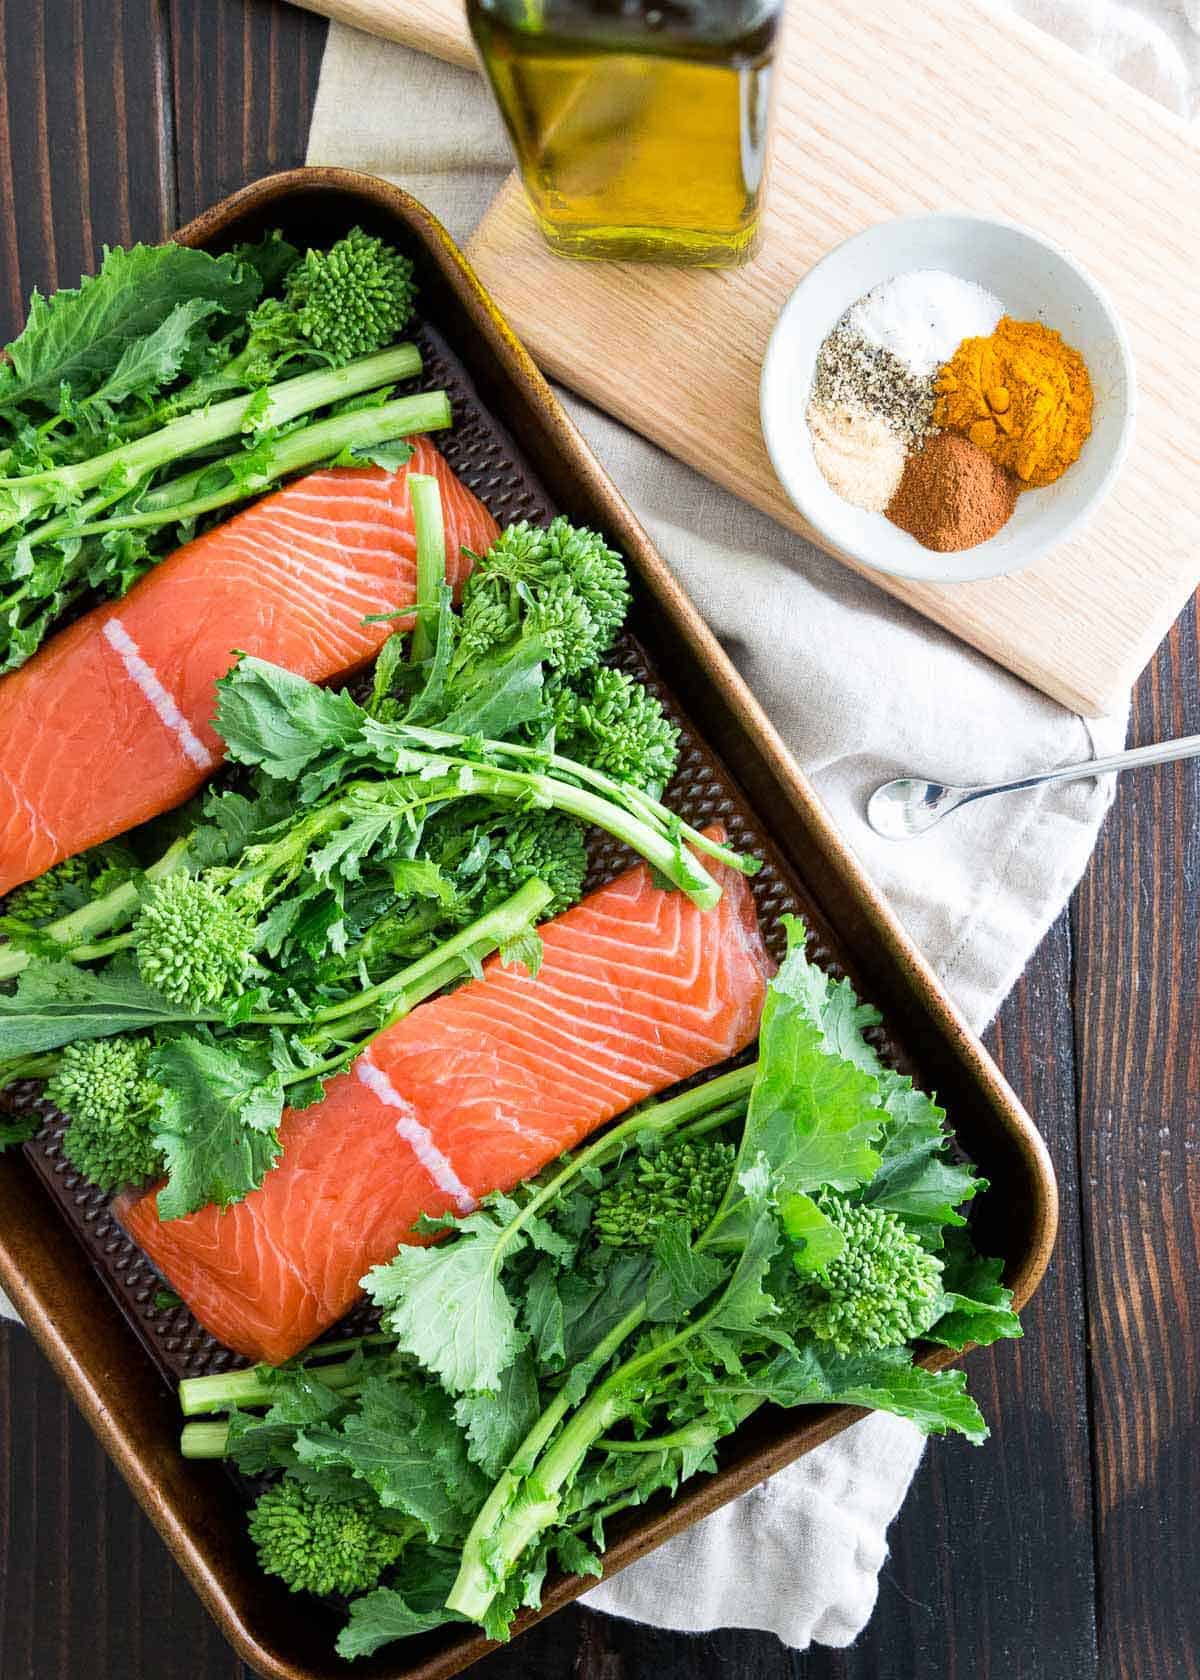 Wild salmon is cooked with broccoli rabe on one pan with a cinnamon turmeric spice mixture for a healthy and easy anti-inflammatory dinner.